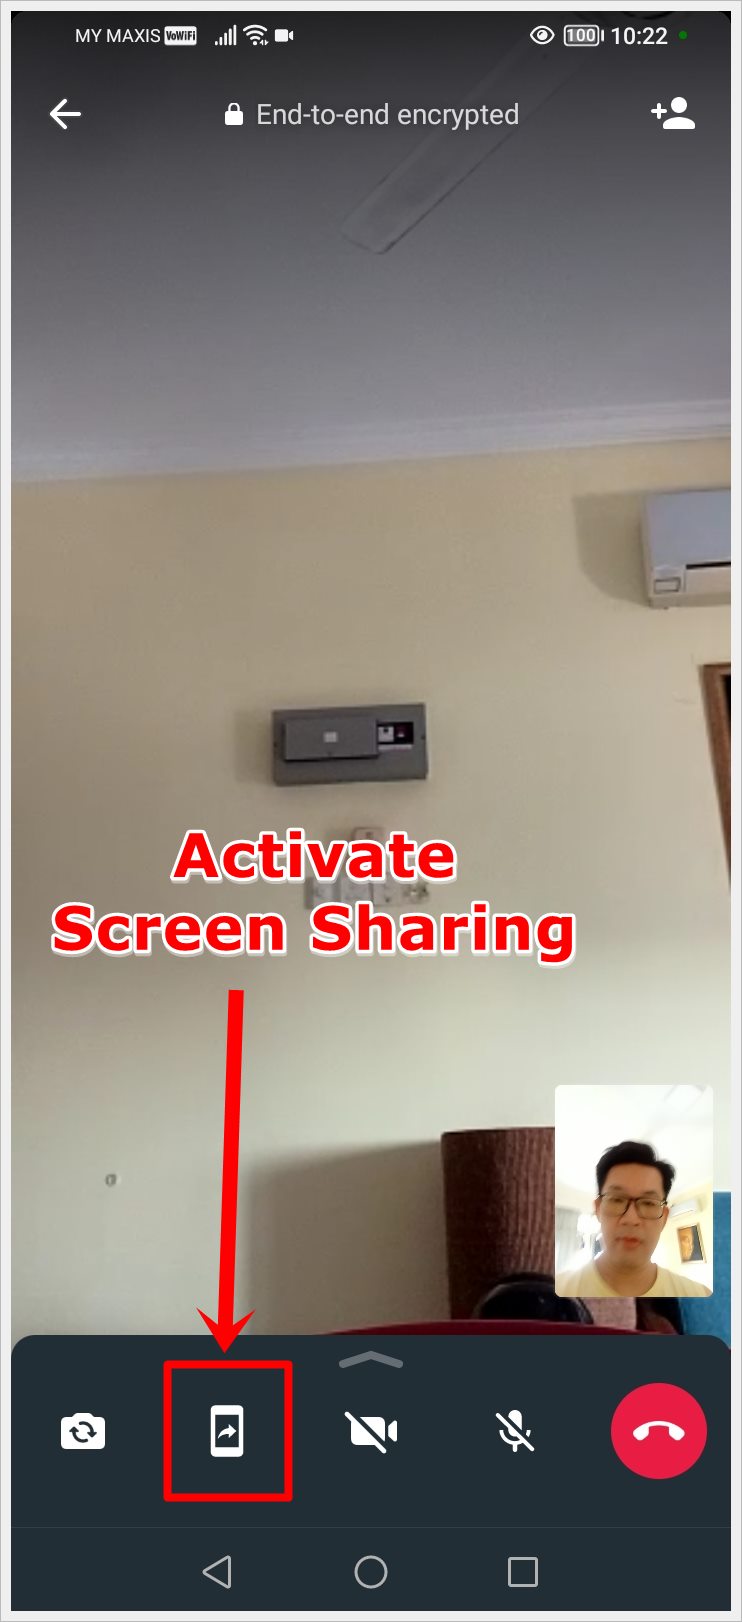 Screenshot from an Android device displaying a WhatsApp video call window, with the 'Screen Sharing' icon highlighted to indicate the option to enable screen sharing with the contact.